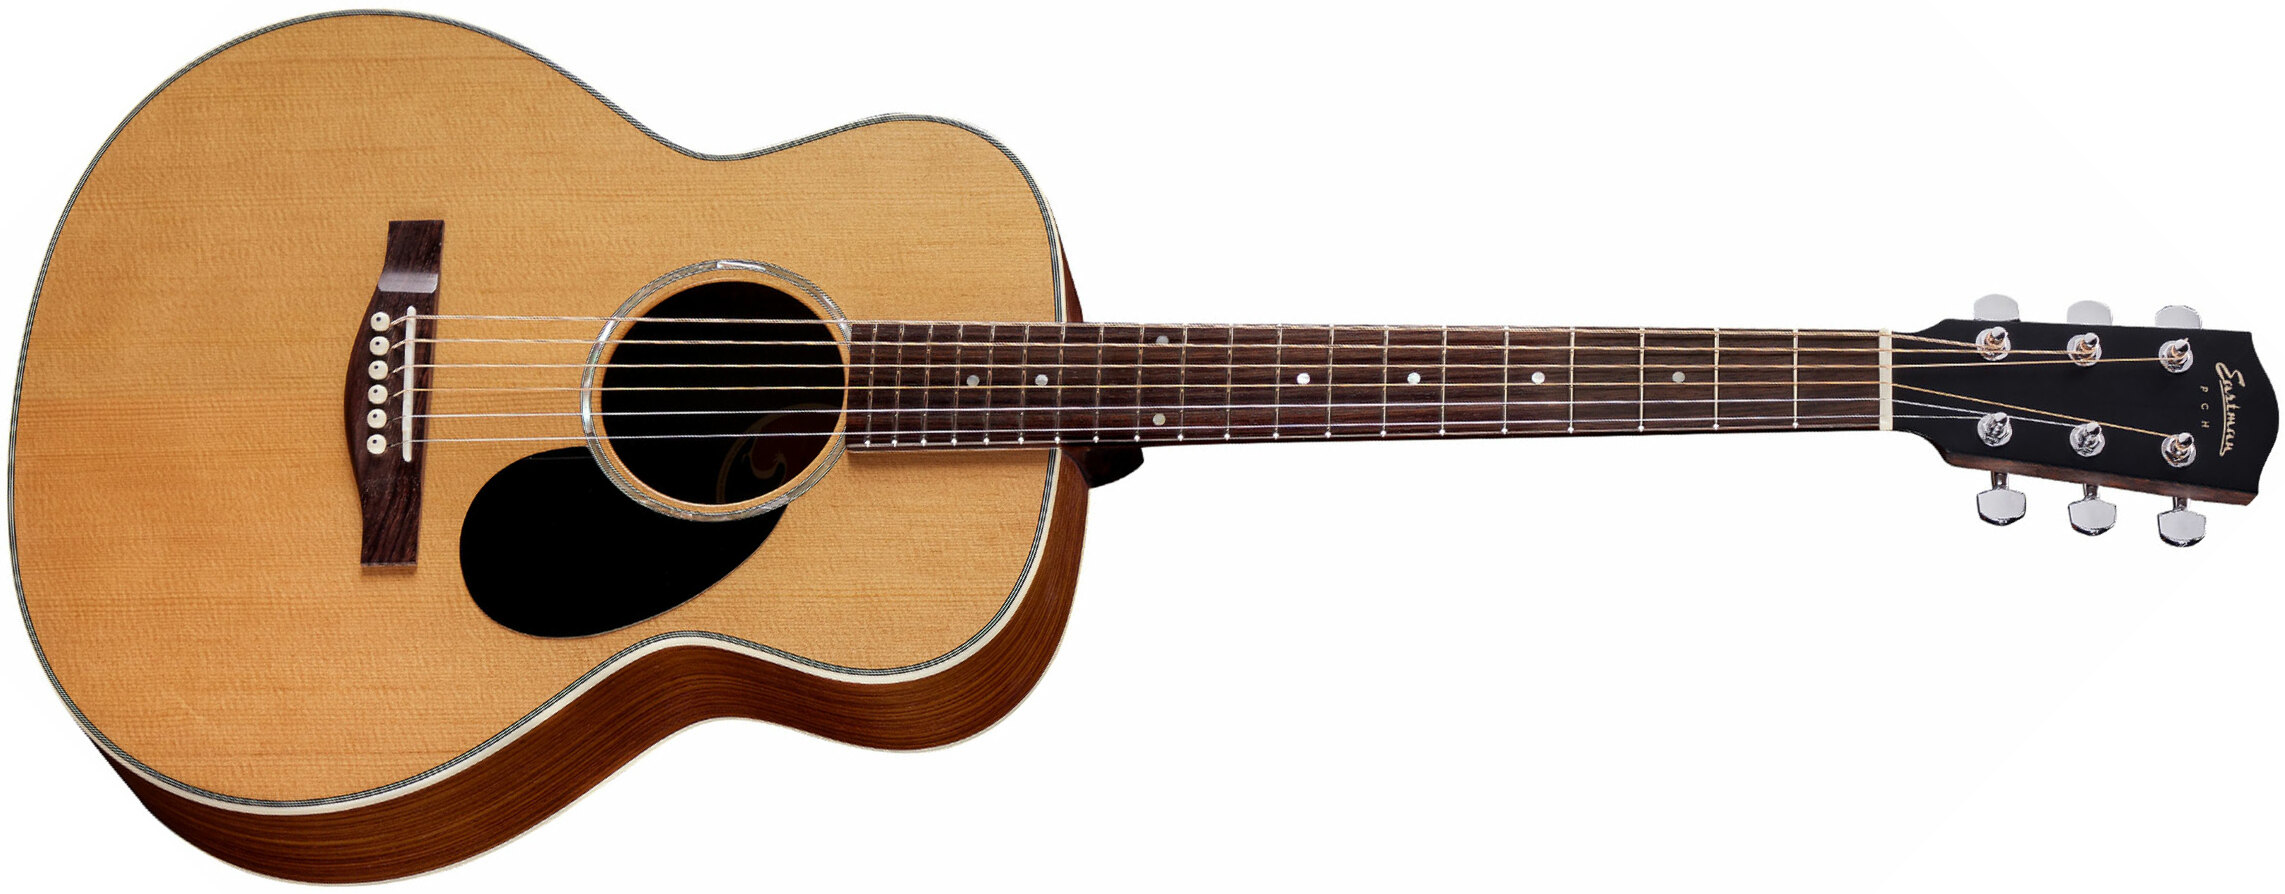 Eastman Pch2-tg Travel Epicea Palissandre Rw - Truetone Natural Gloss - Travel acoustic guitar - Main picture